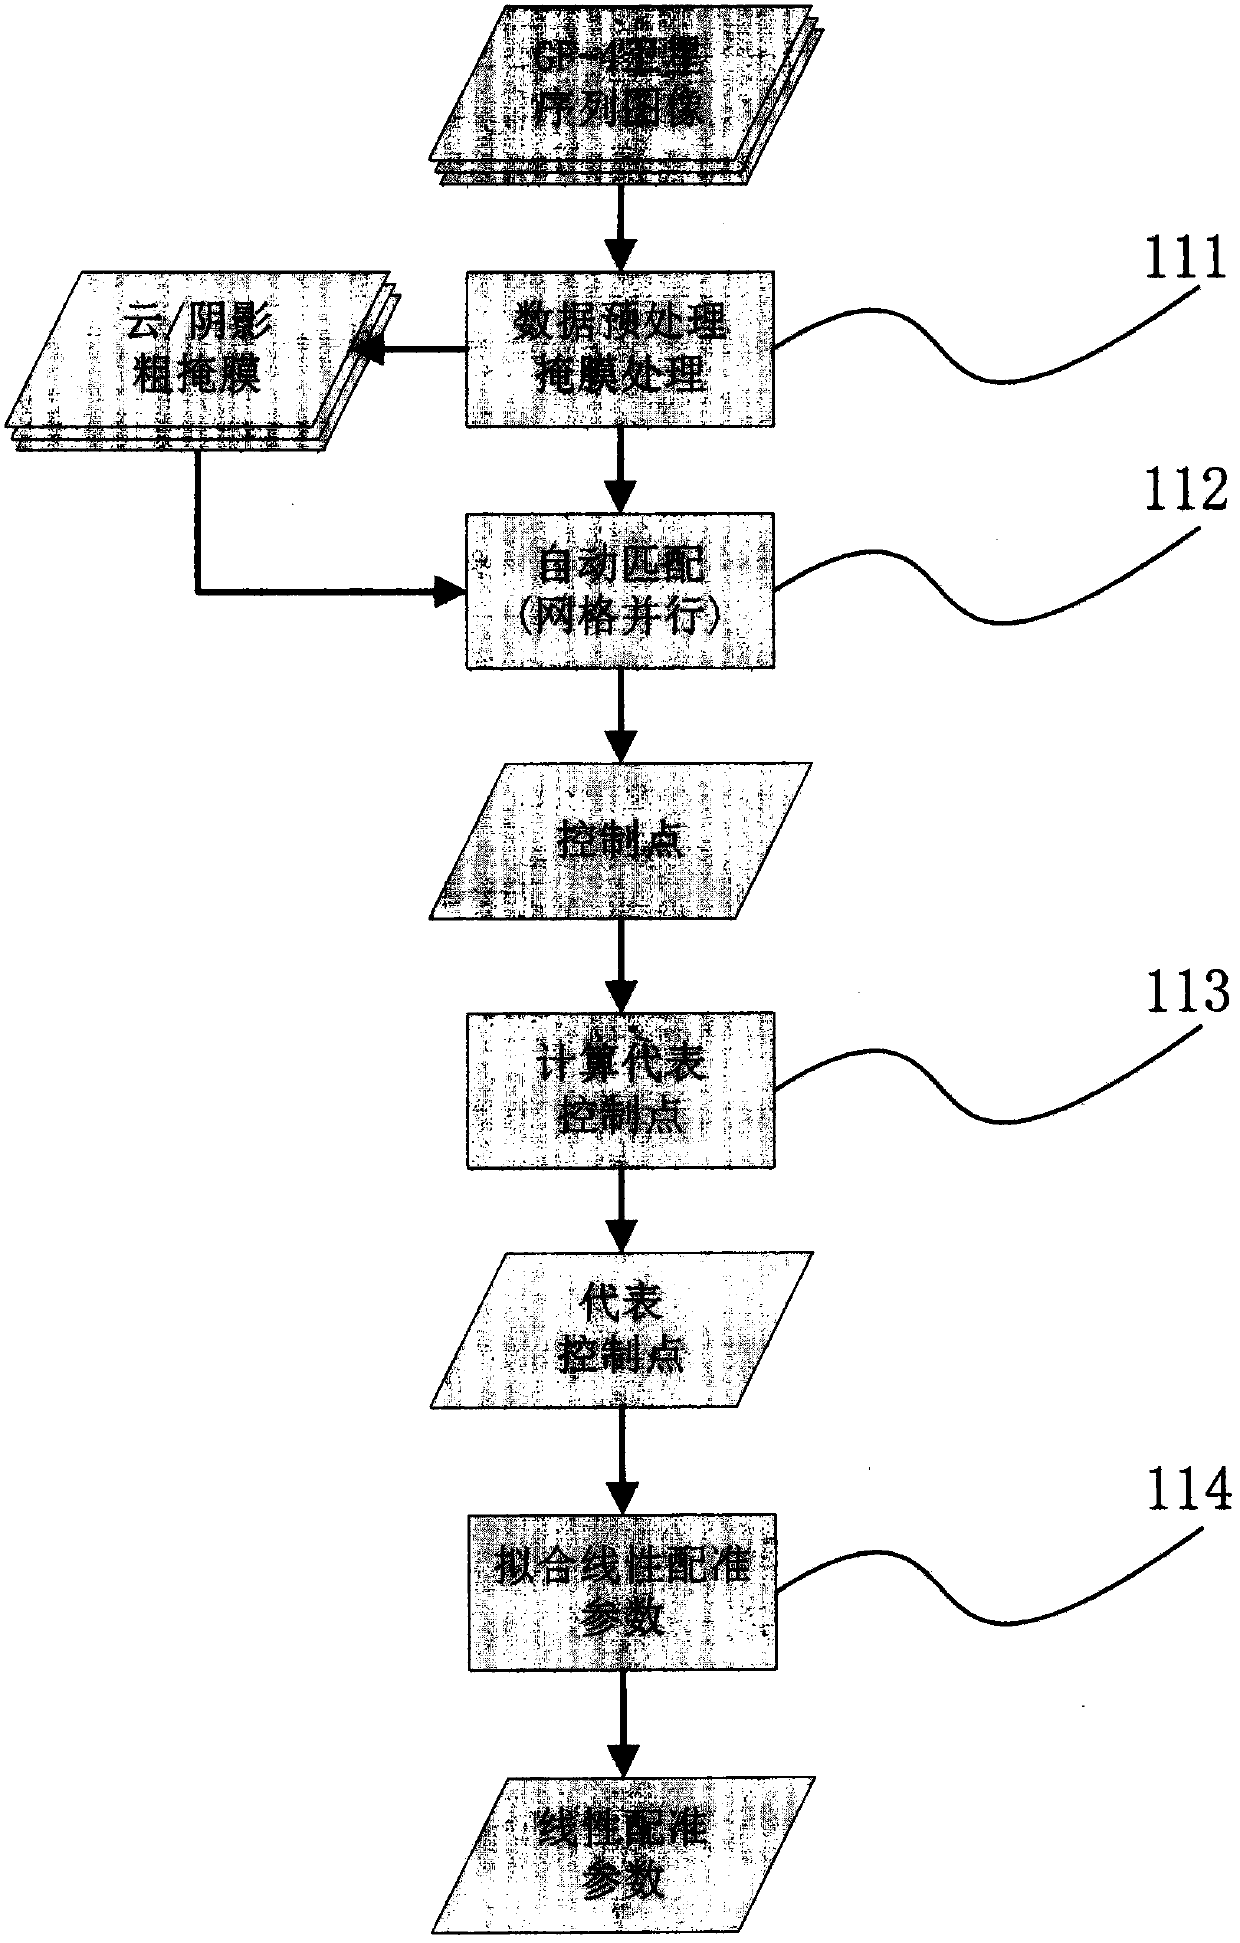 A Method for Automatic Relative Registration of GF-4 Satellite Sequence Images